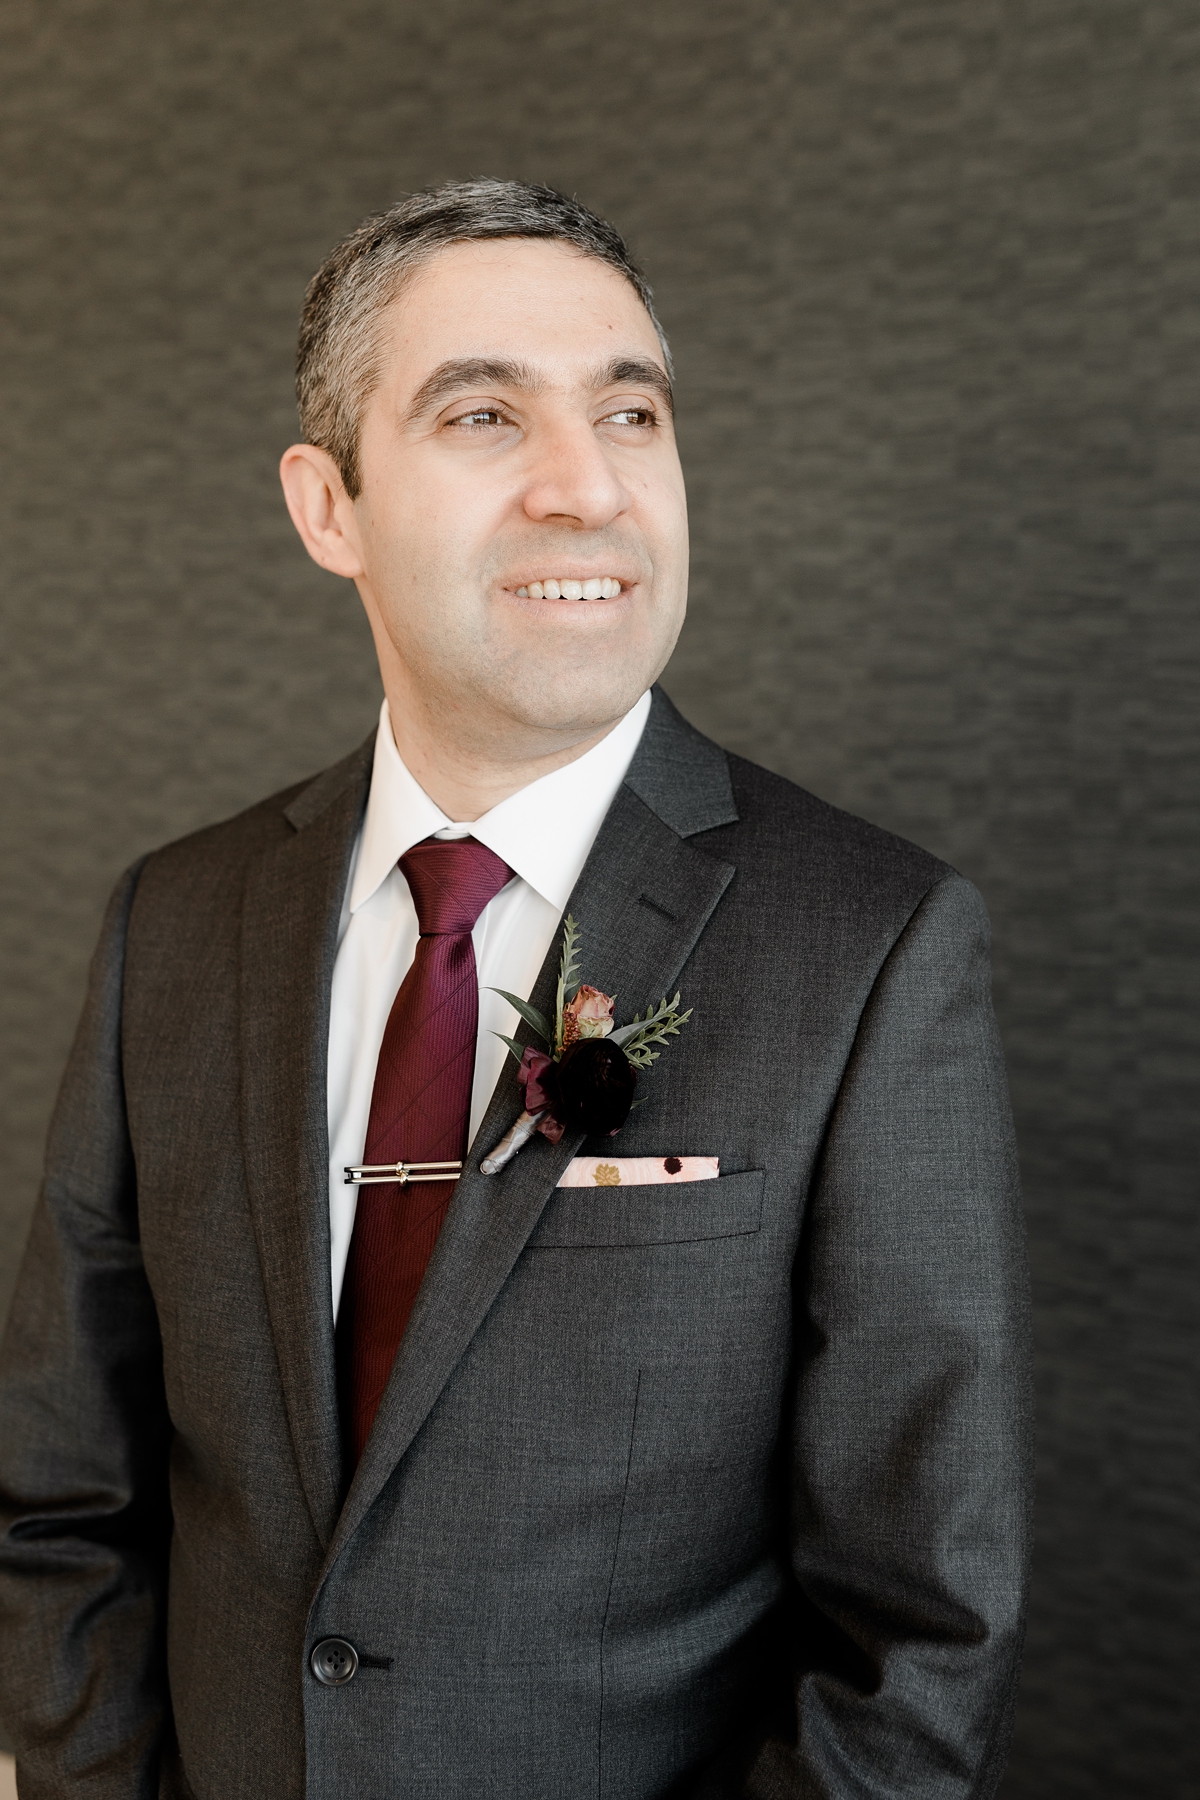 Groom grey suit with maroon and pink boutonnière and tie